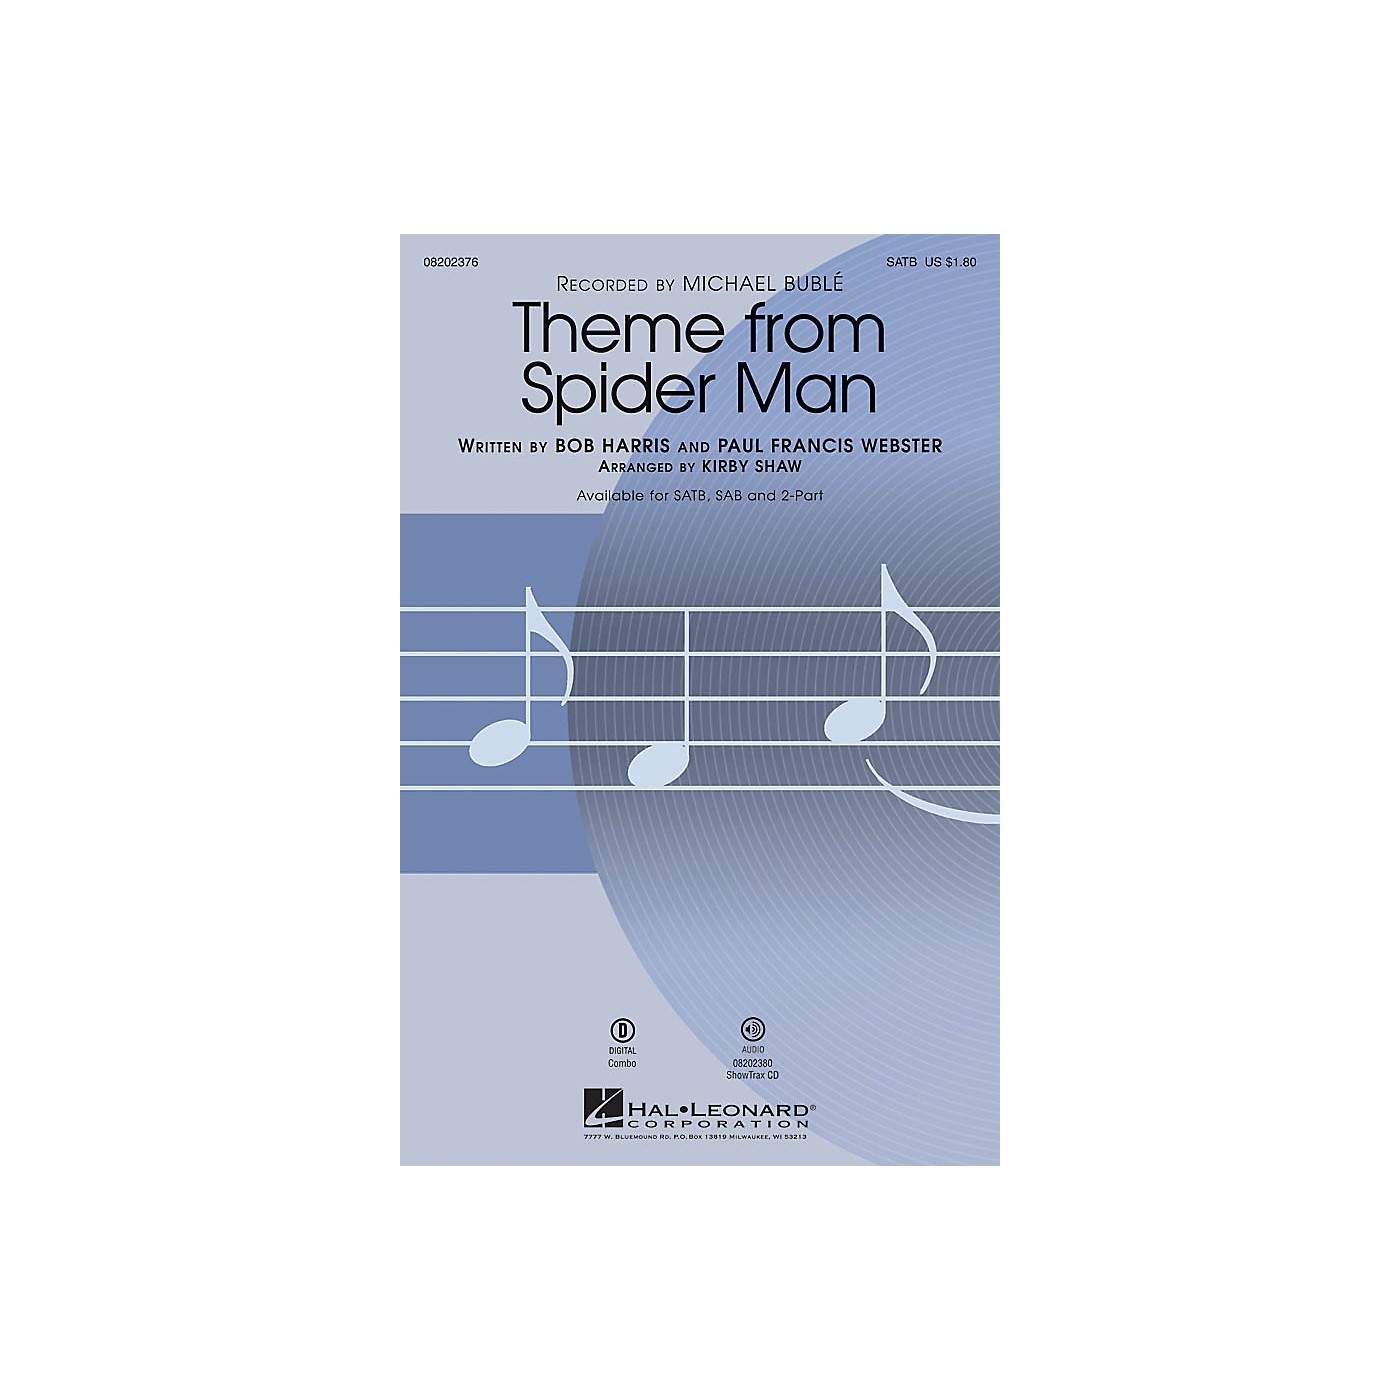 Hal Leonard Theme from Spider Man ShowTrax CD by Michael Bublé Arranged by Kirby Shaw thumbnail